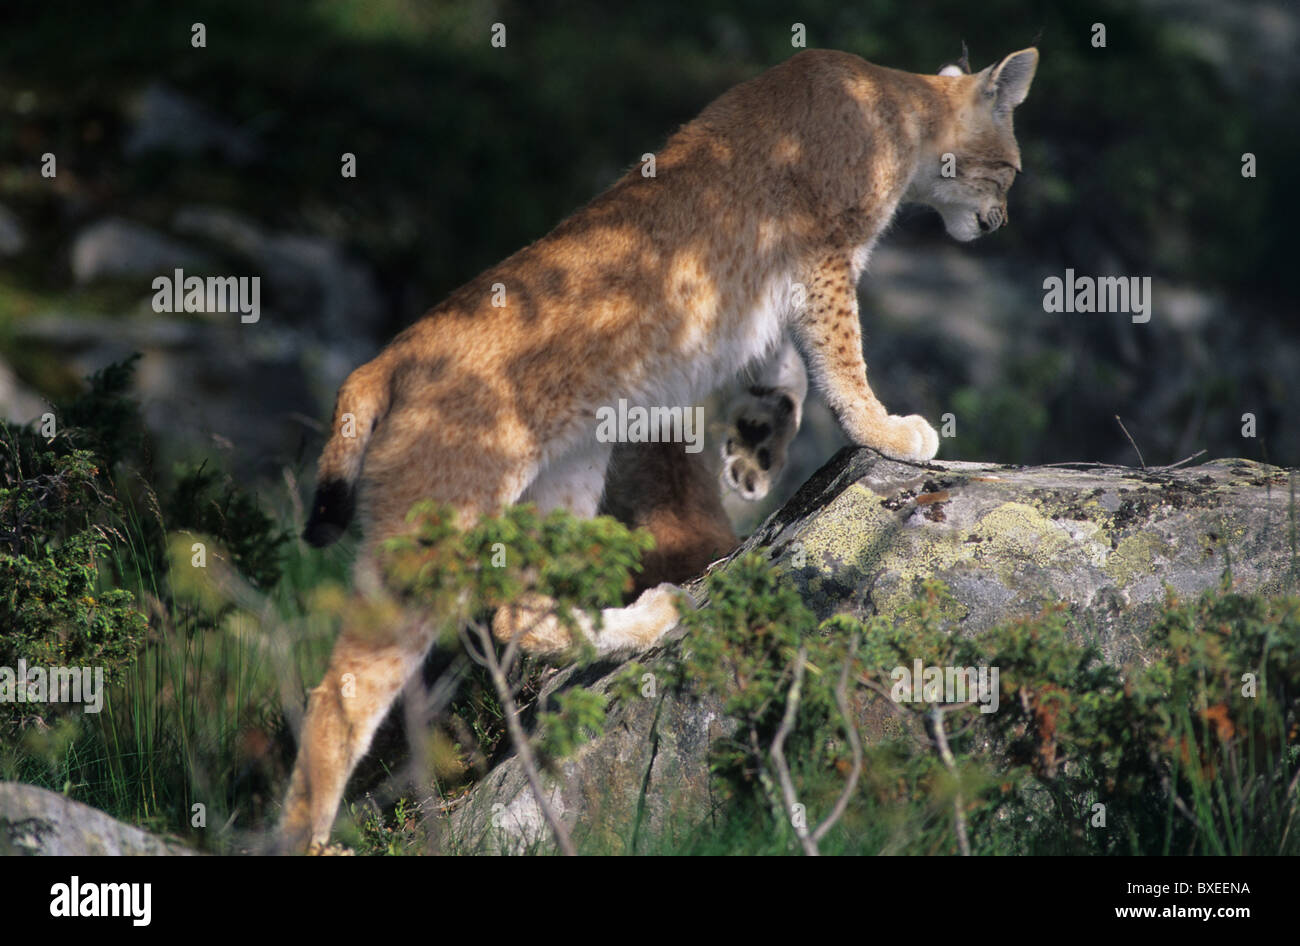 Close up picture of a lynx, nature, wildlife, lynx Stock Photo